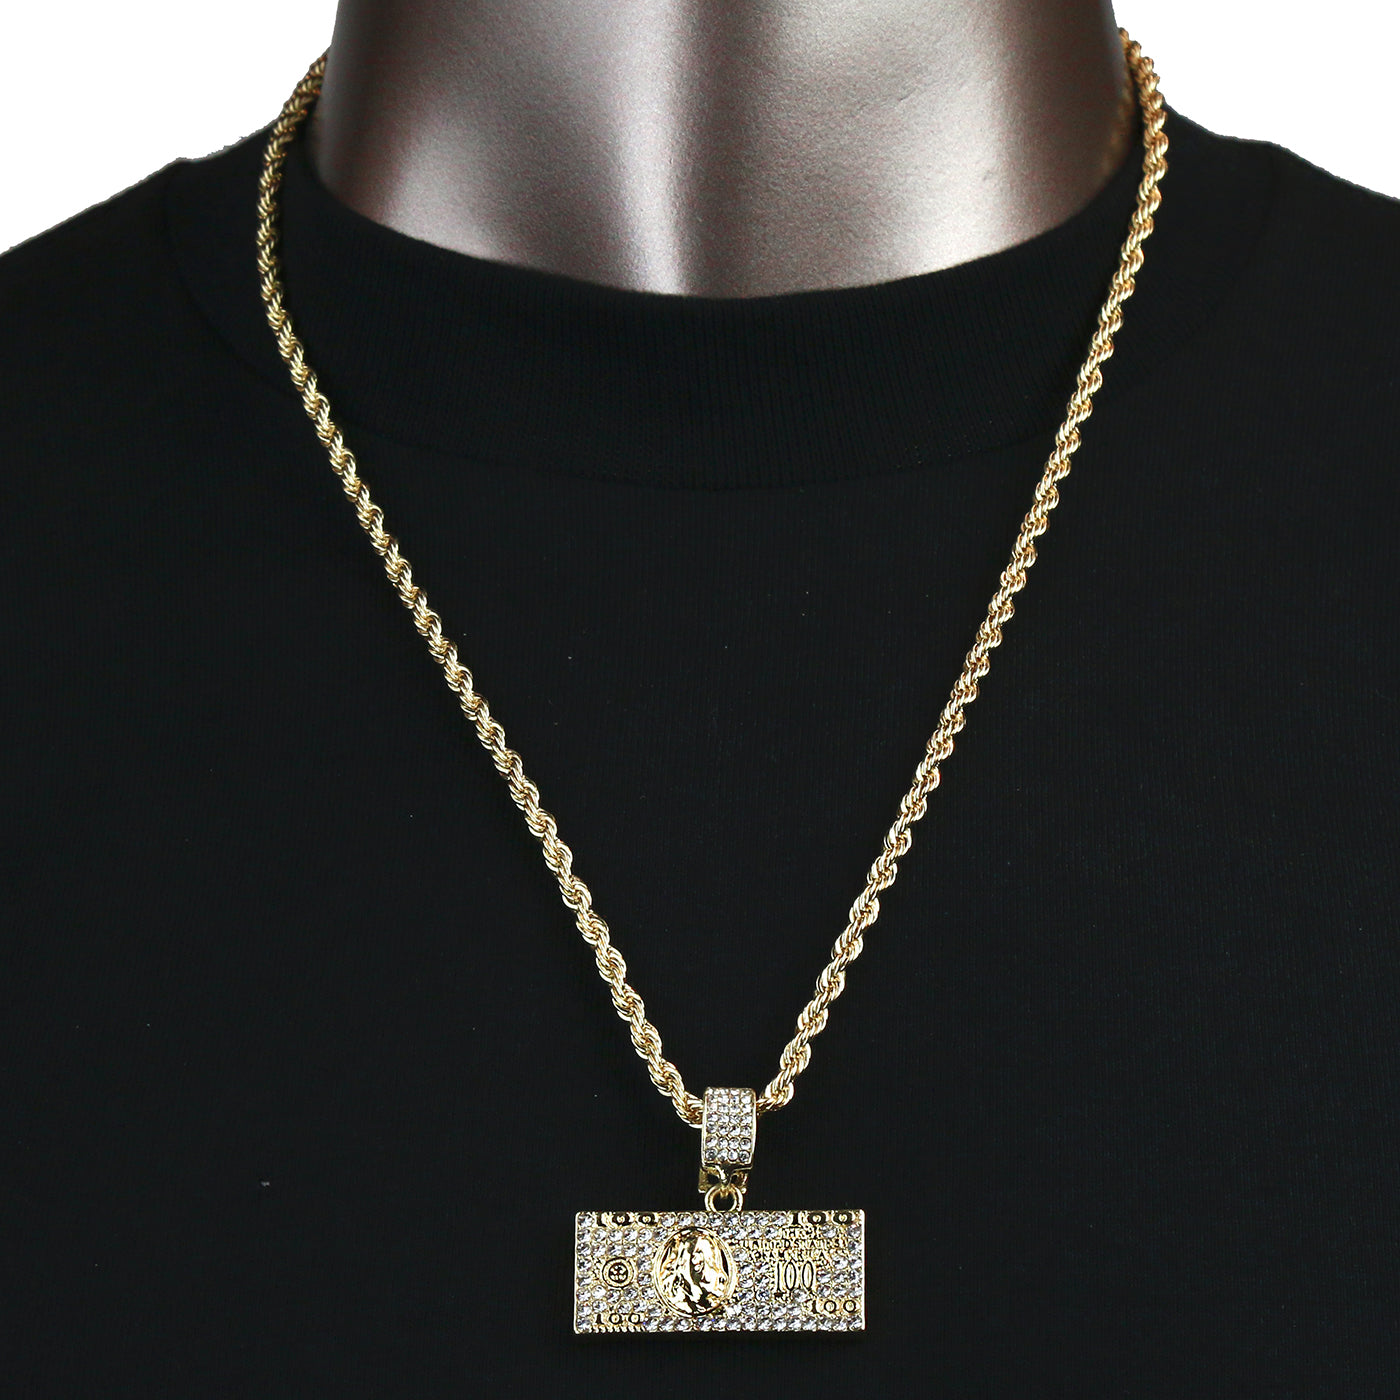 Dollar Bill Pendant with Gold Rope Chain